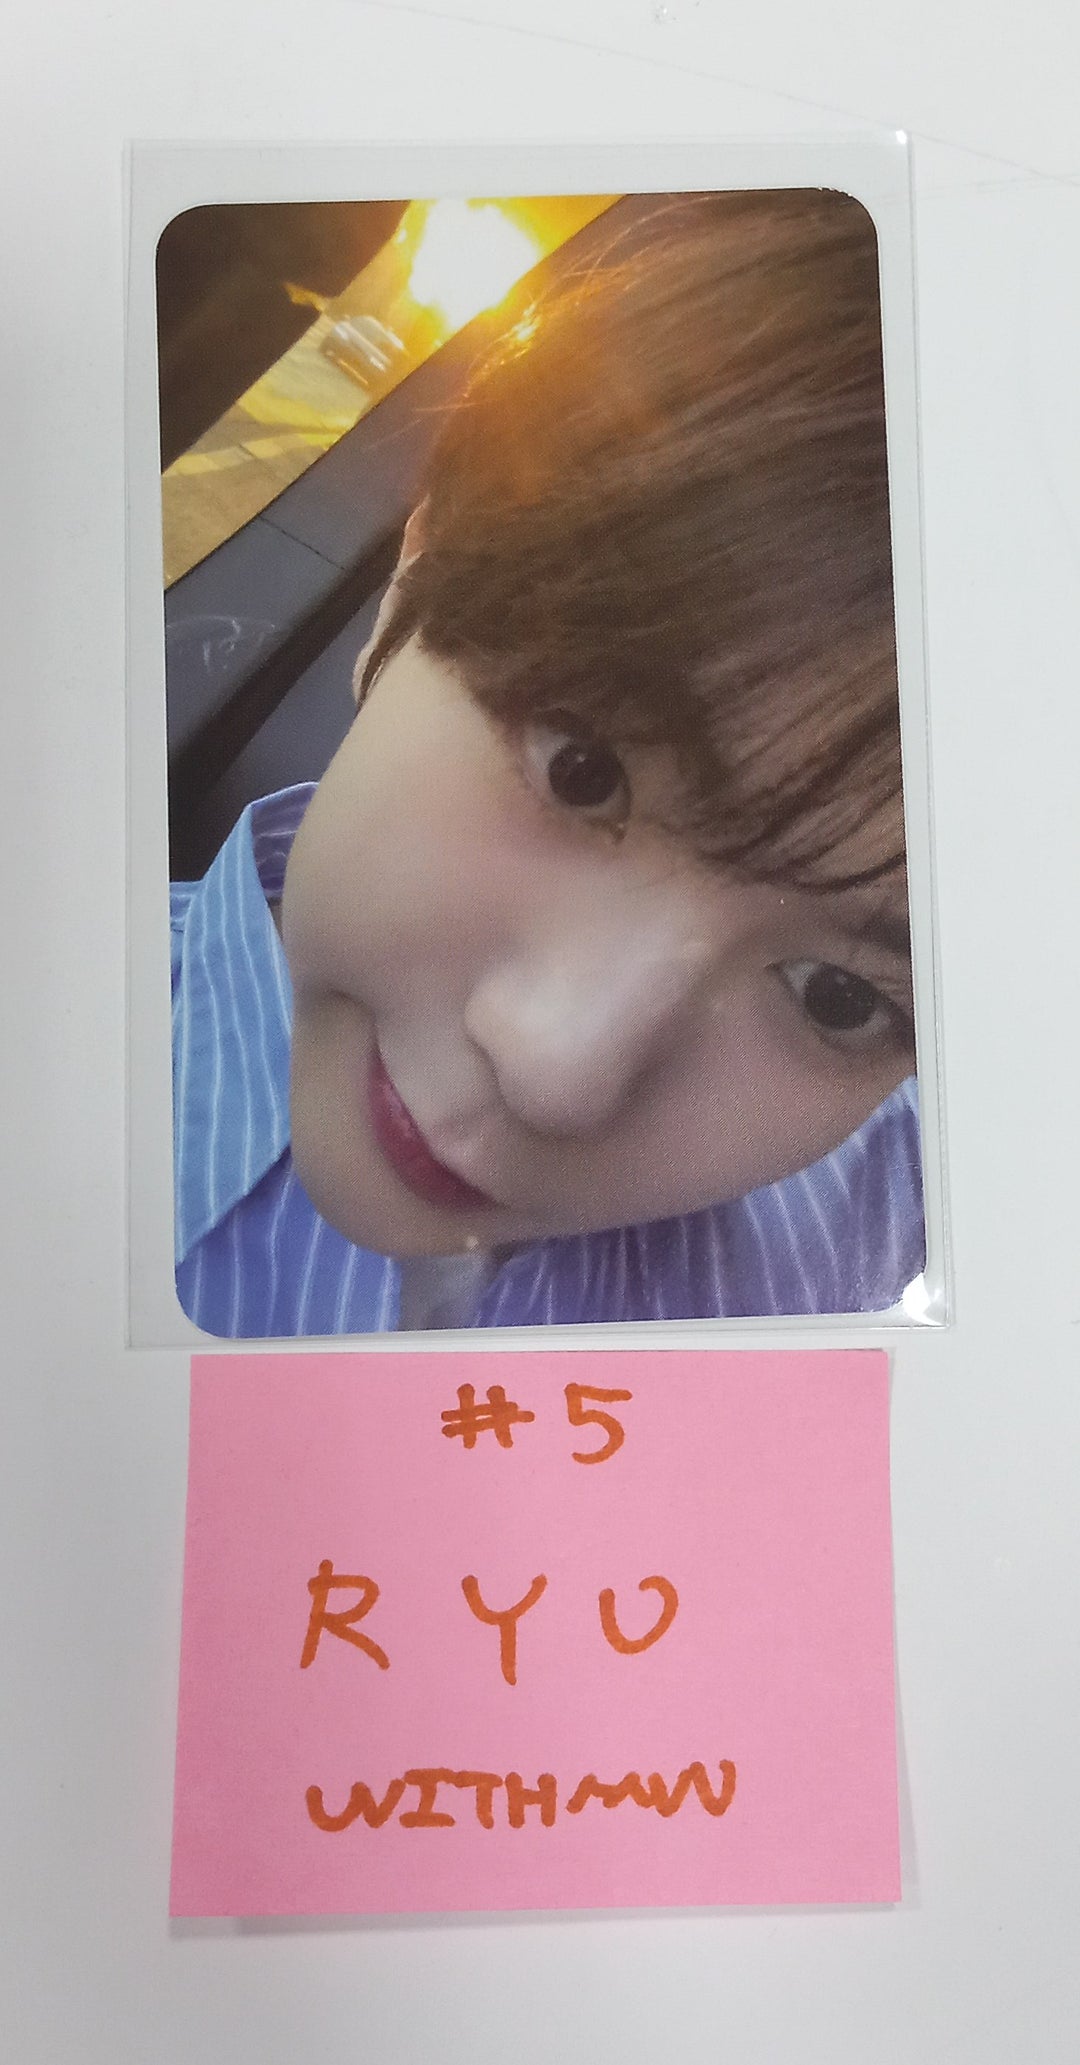 NCT Wish - Withmuu Fansign Event Photocard [24.5.20]